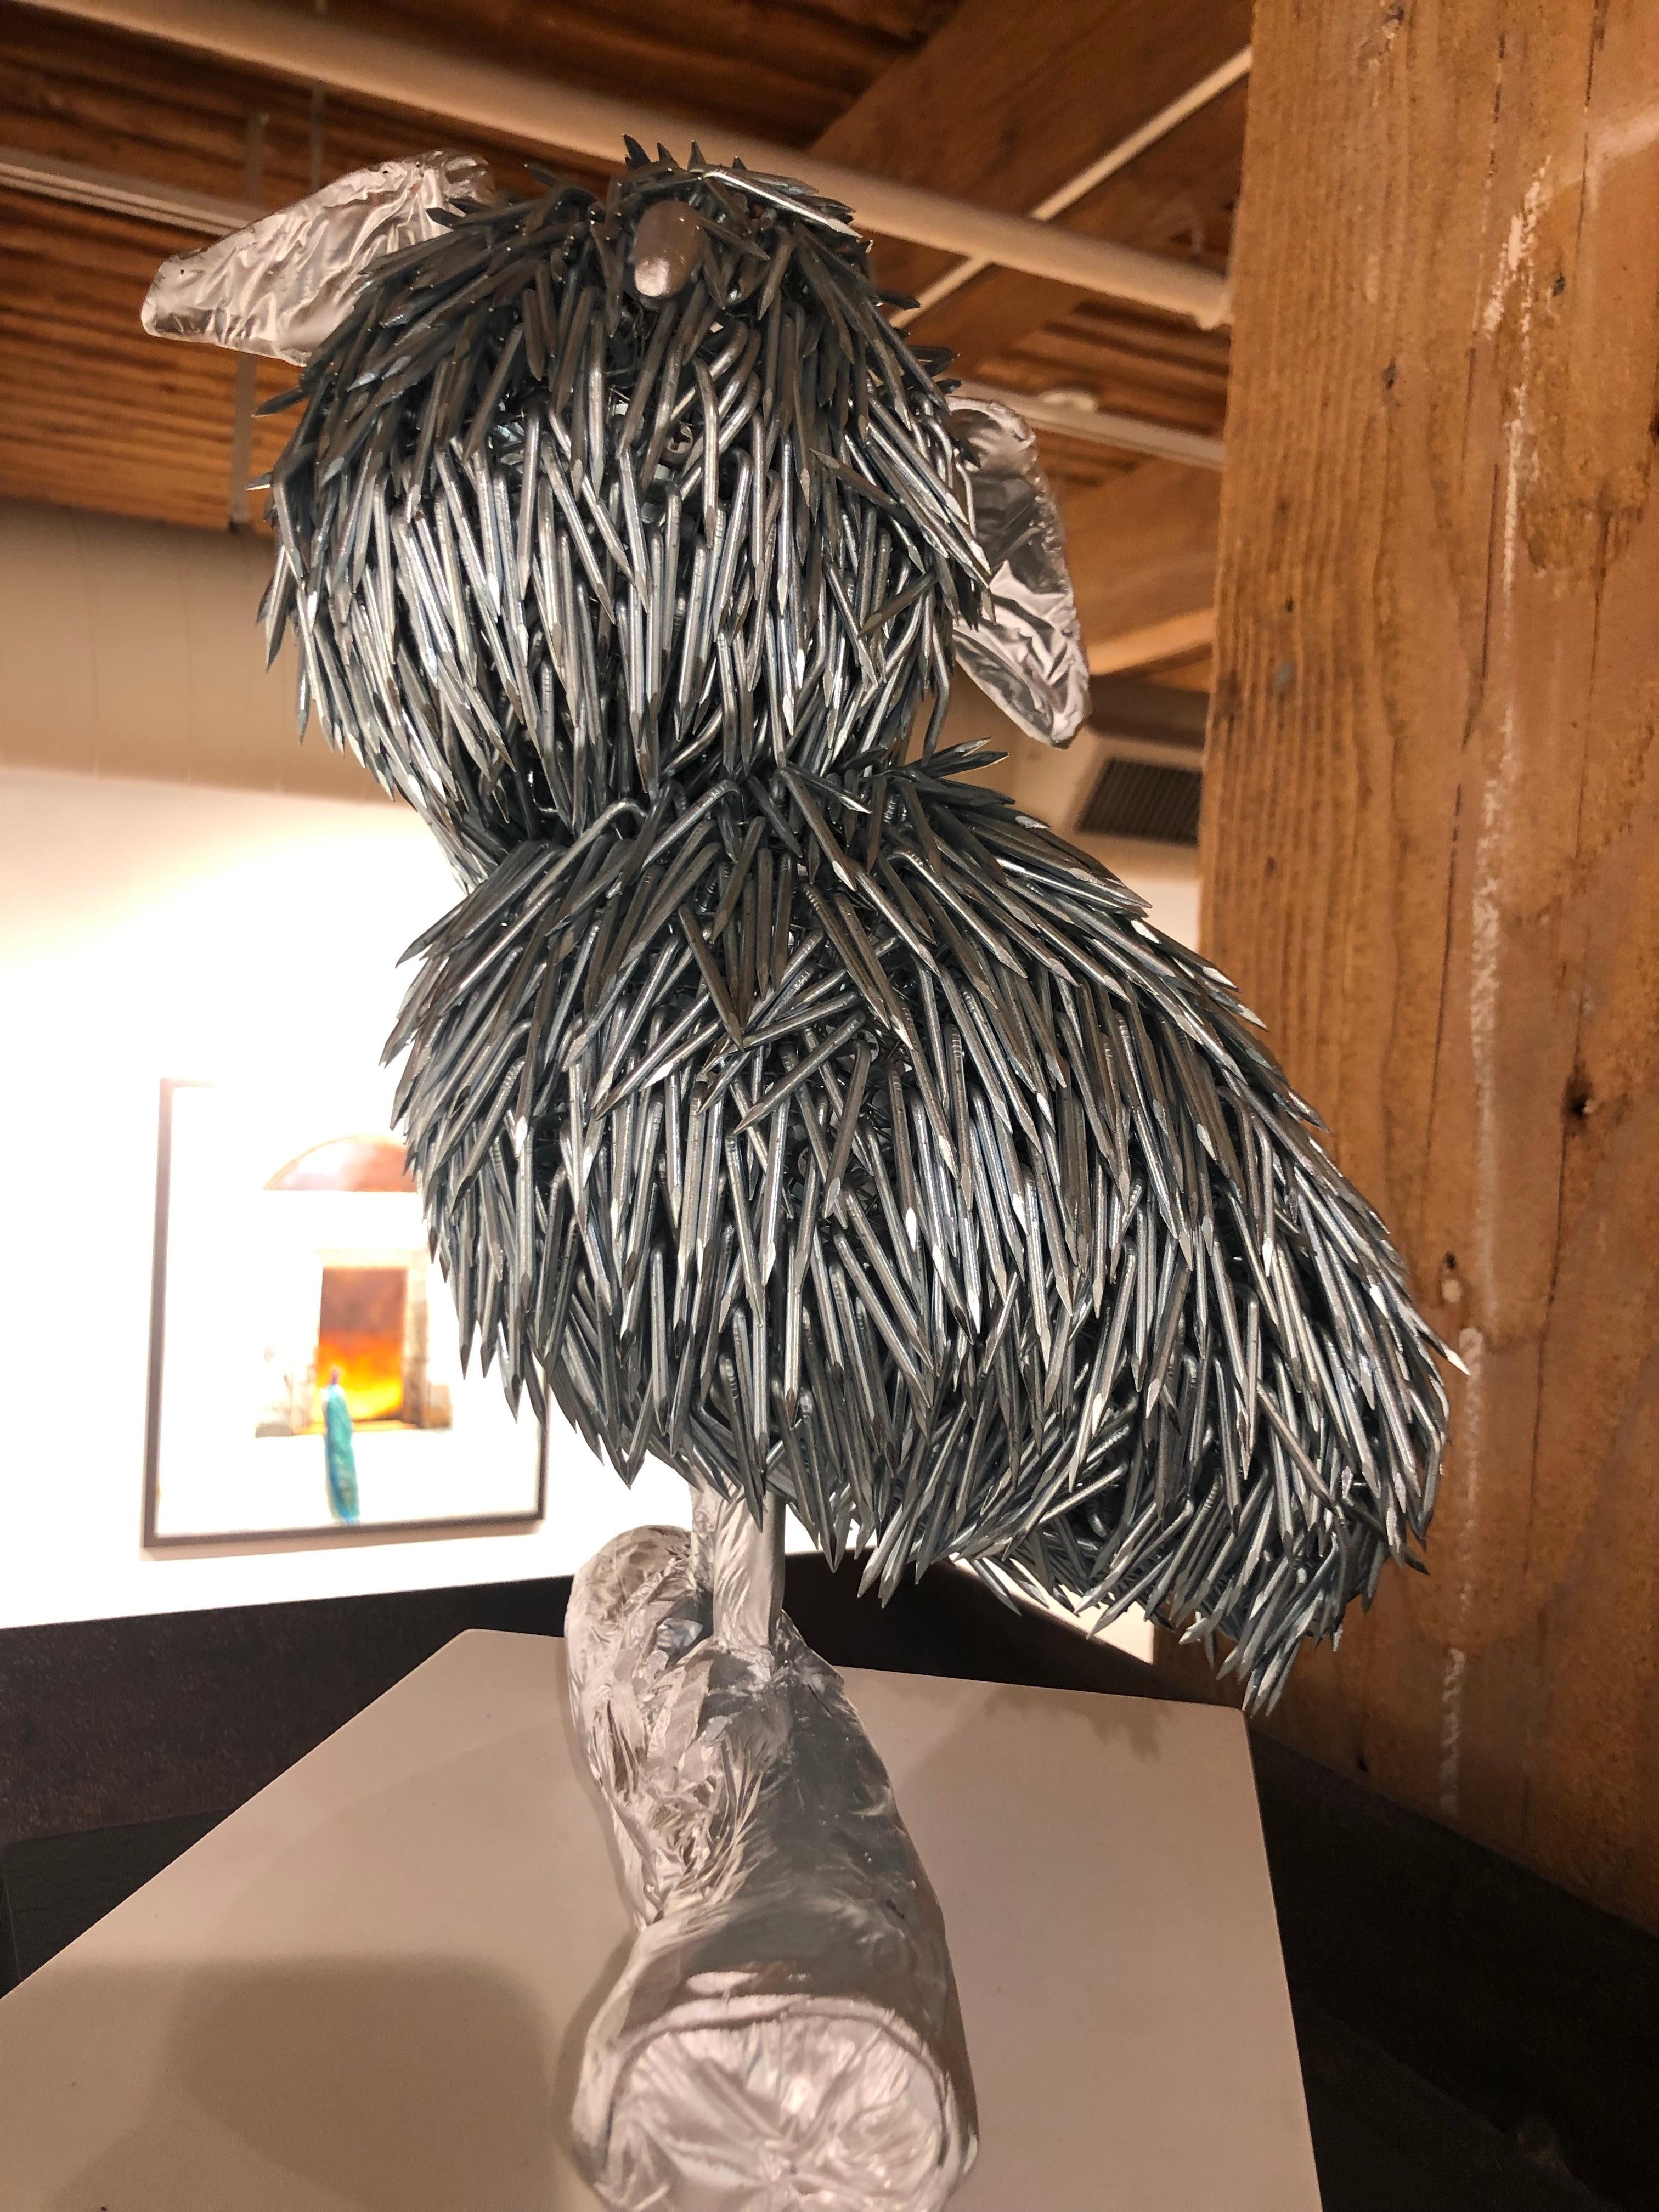 Yaku, Owl Like Sculpture Created from Galvanized Construction Nails 1